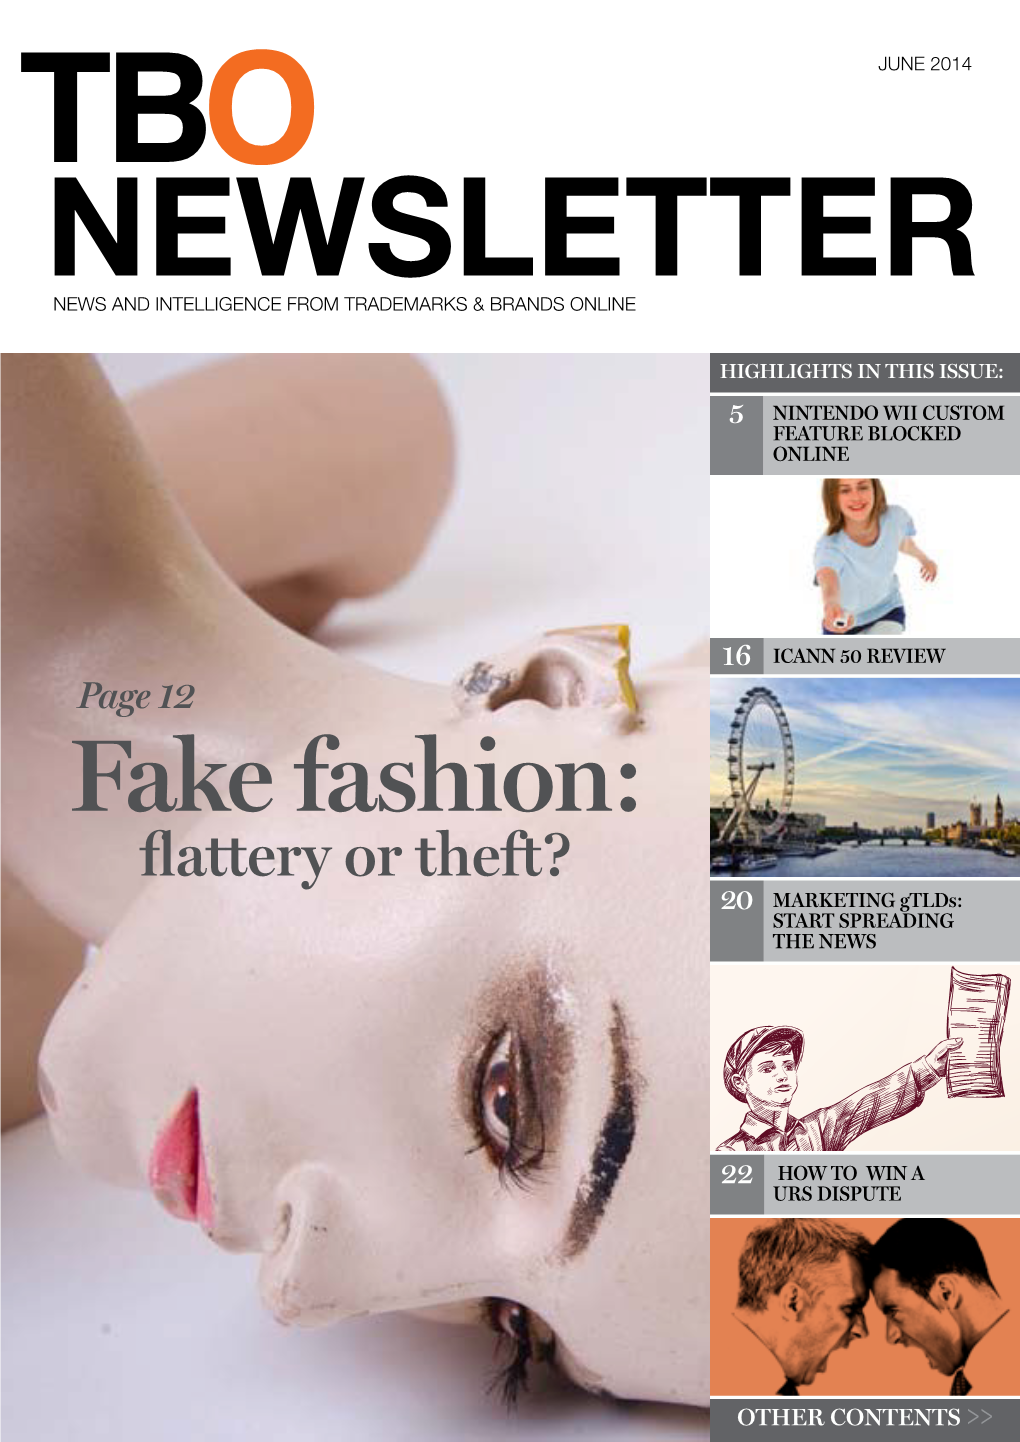 Fake Fashion: Flattery Or Theft? 20 MARKETING Gtlds: START SPREADING the NEWS